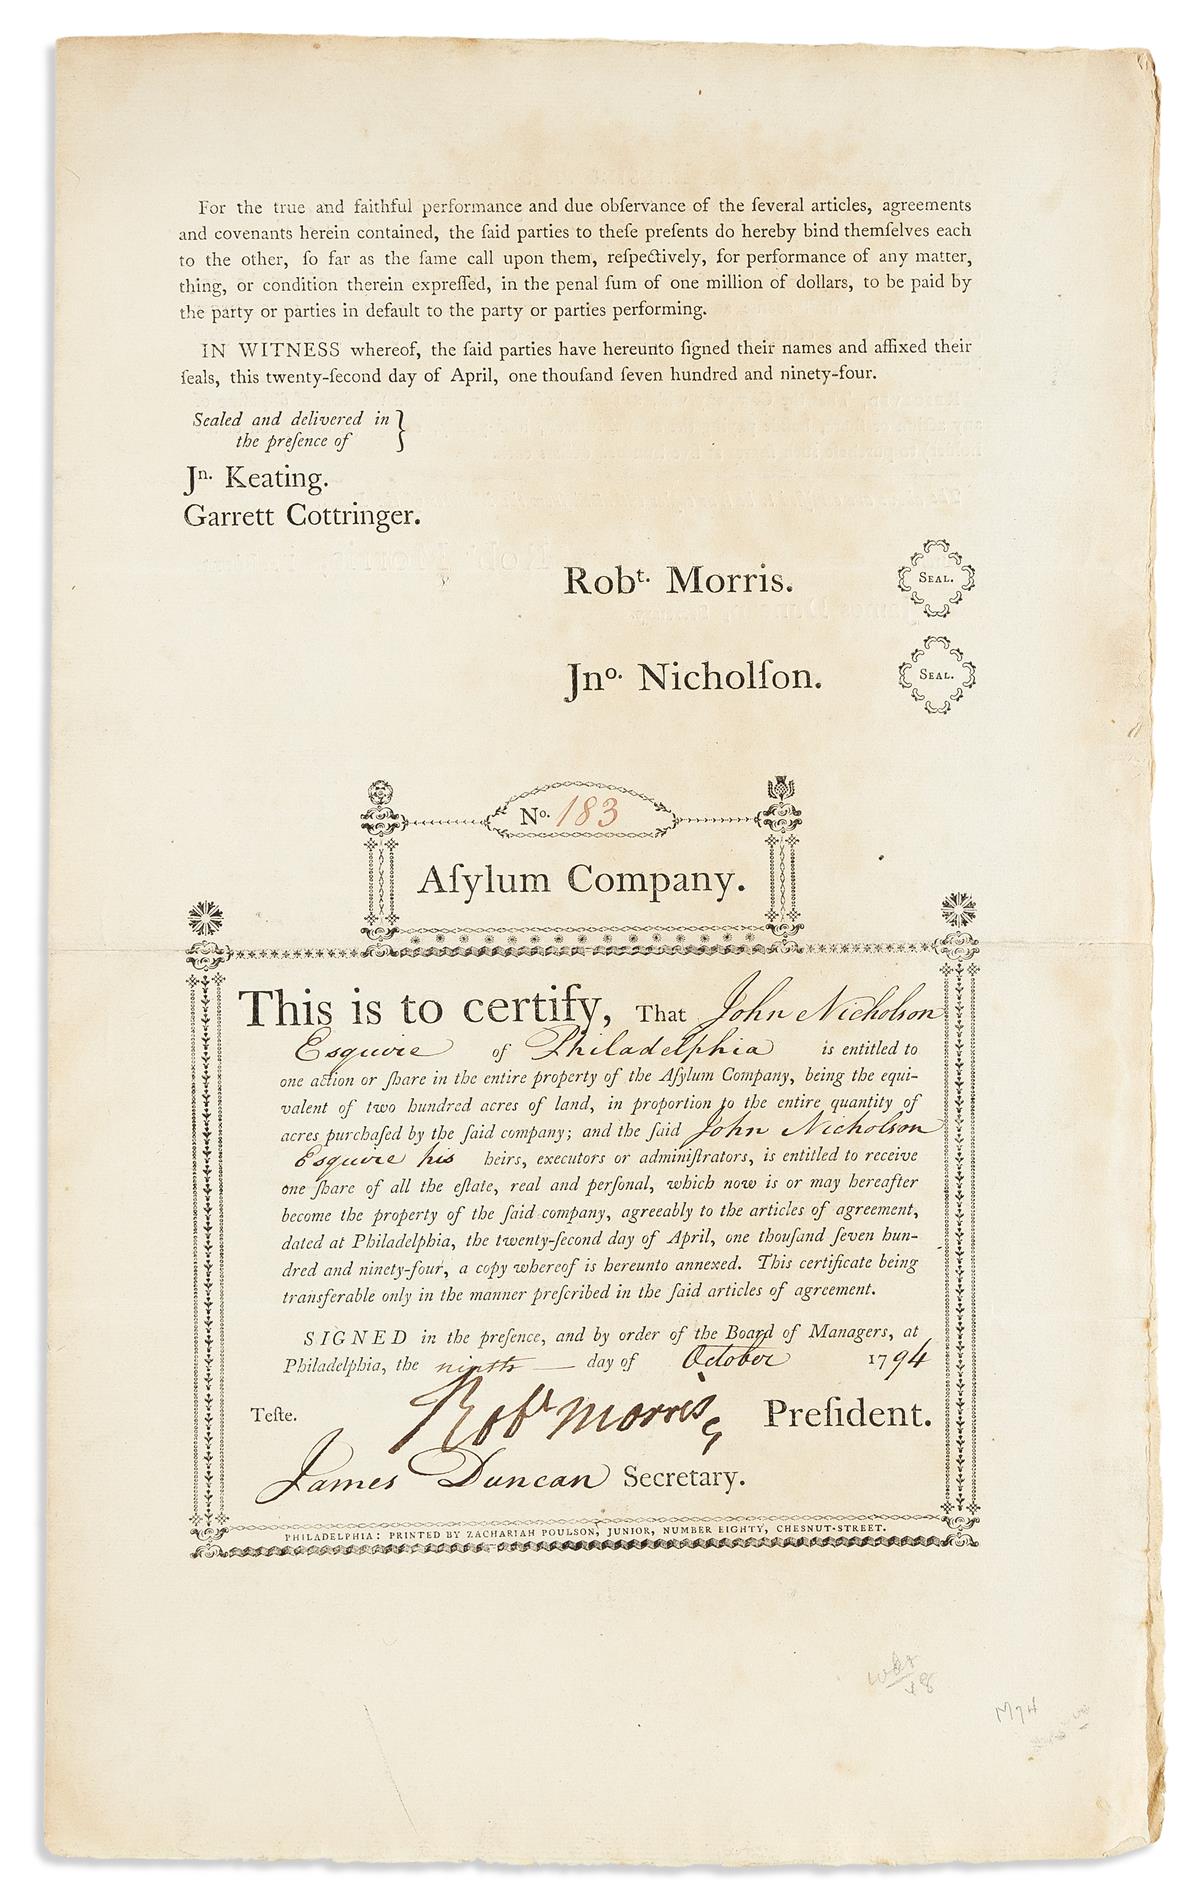 MORRIS, ROBERT. Partly-printed Document Signed, RobtMorris, as President of the Asylum Company, issuing a share in Asylum to John Ni